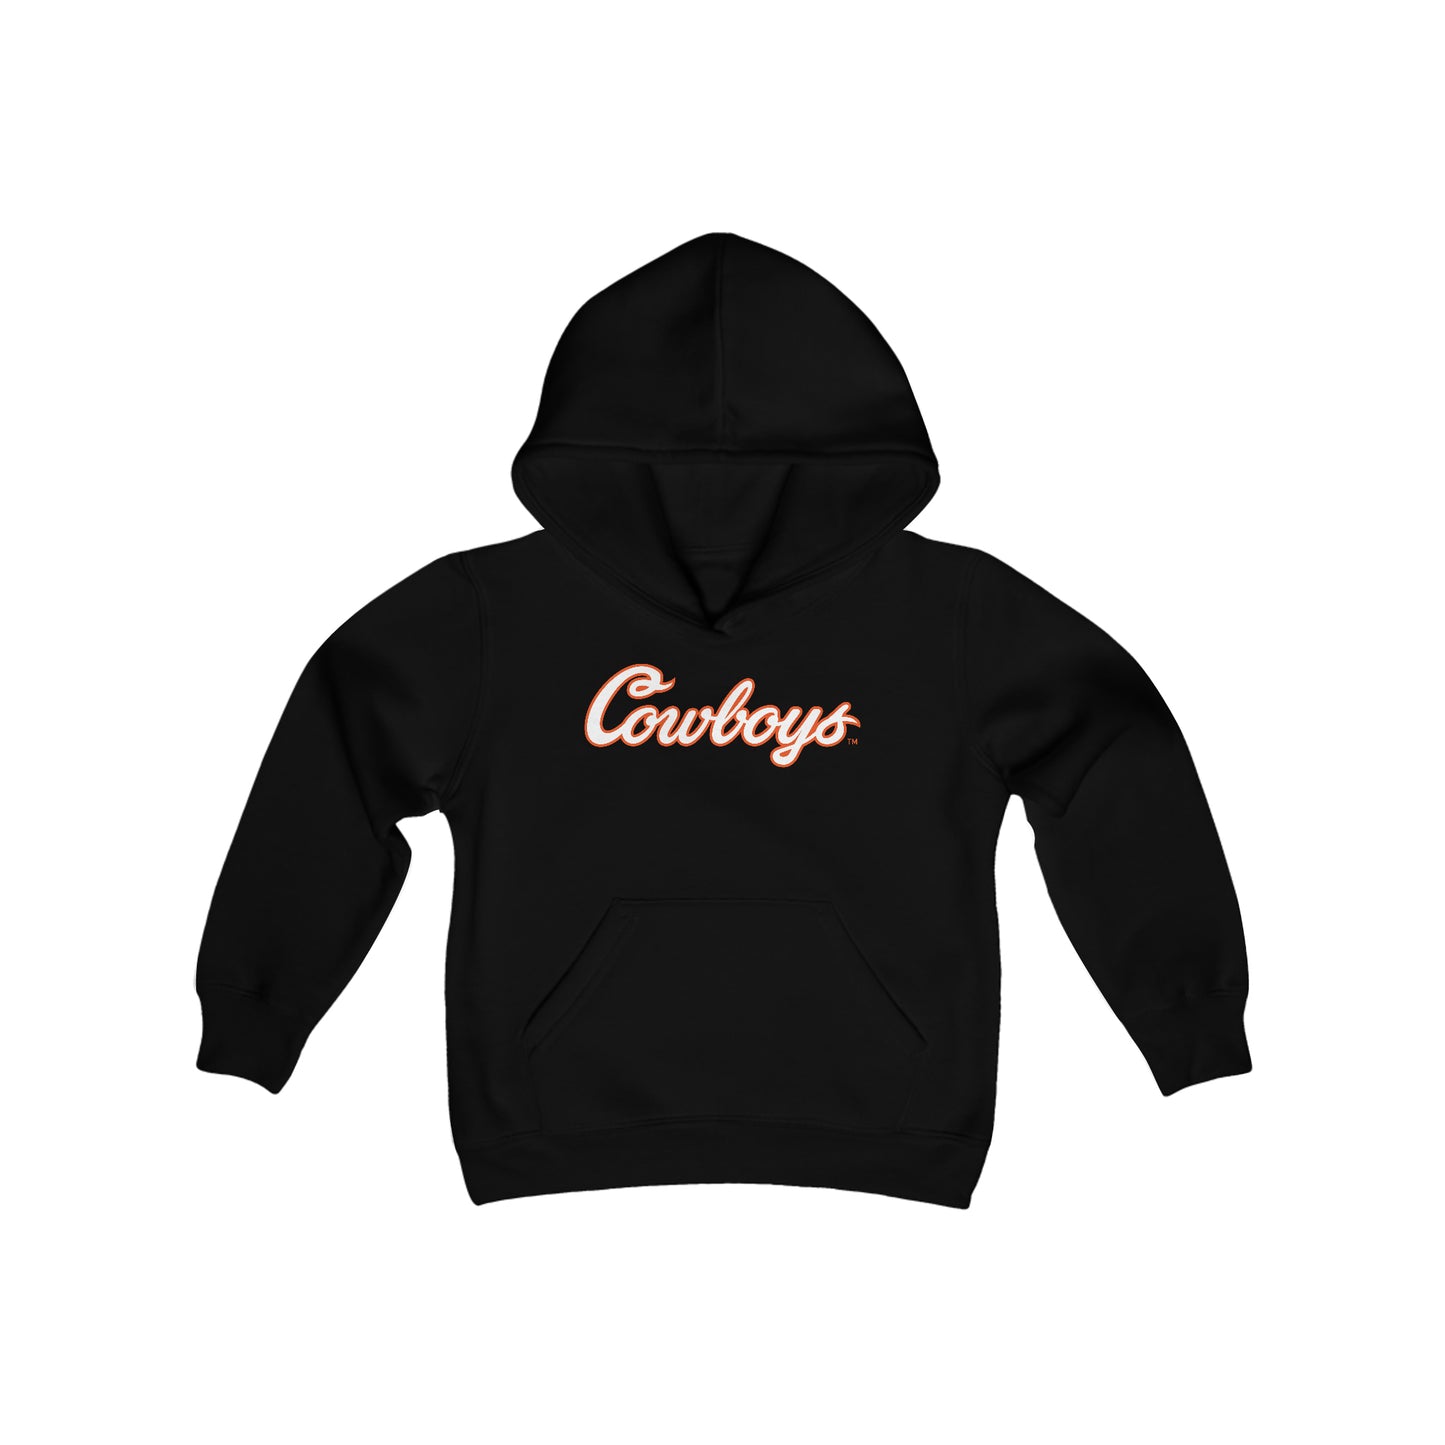 Cale Cabbiness #83 Cursive Cowboys Youth Hoodie